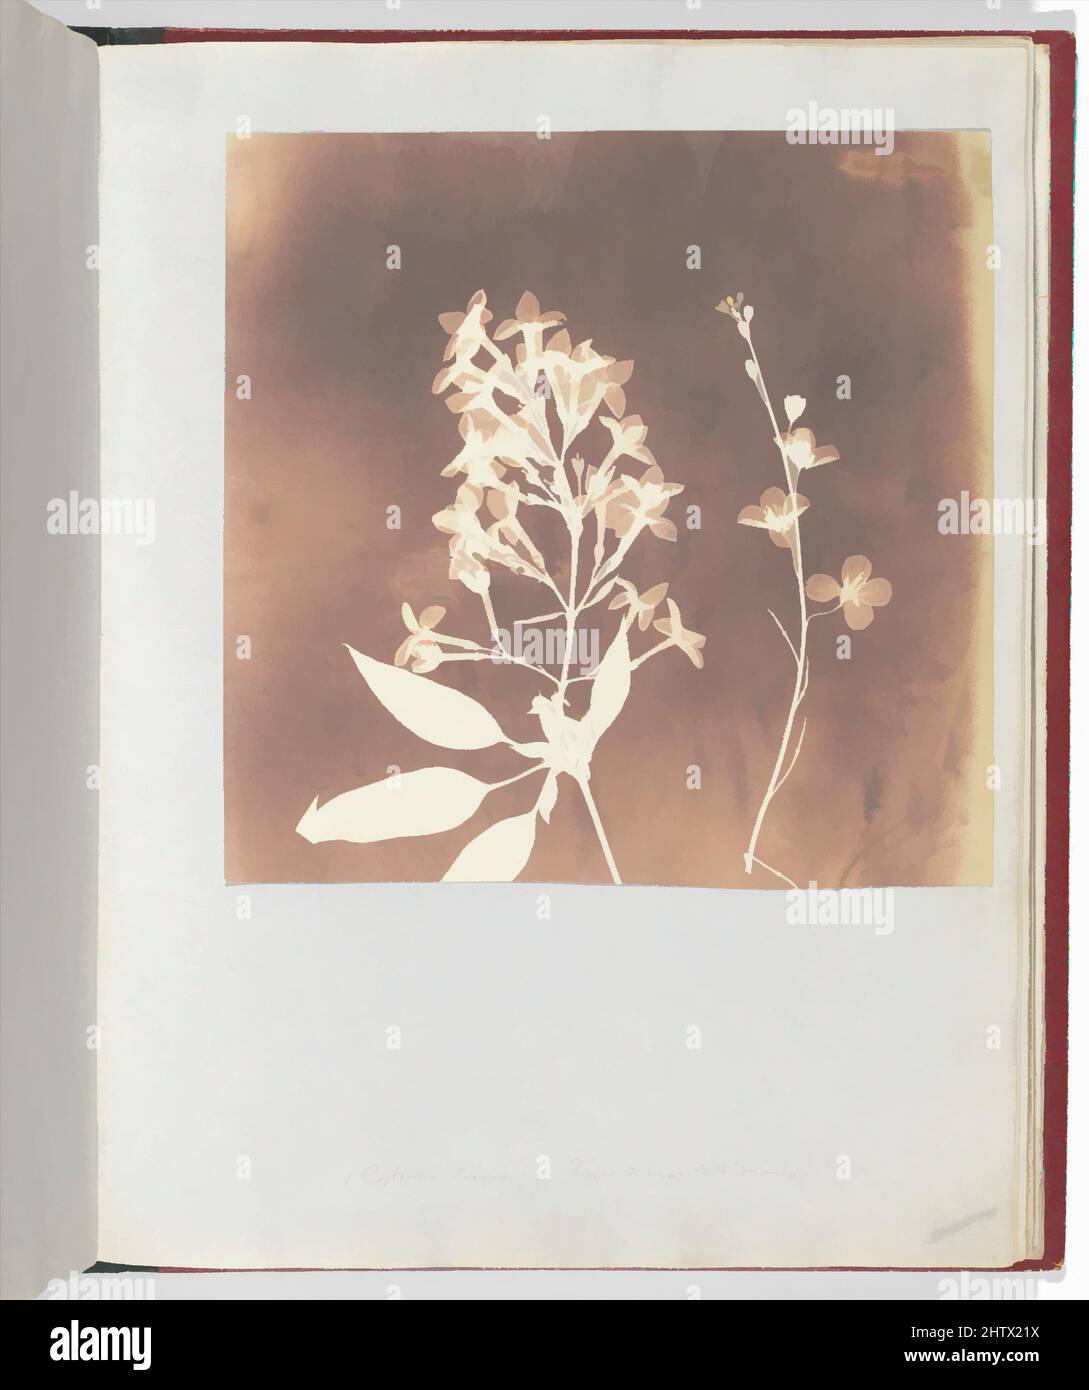 Art inspired by Heliophila, 1839, Photogenic drawing, 17.3 x 17.5 cm (6 13/16 x 6 7/8 in.), Photographs, William Henry Fox Talbot (British, Dorset 1800–1877 Lacock, Classic works modernized by Artotop with a splash of modernity. Shapes, color and value, eye-catching visual impact on art. Emotions through freedom of artworks in a contemporary way. A timeless message pursuing a wildly creative new direction. Artists turning to the digital medium and creating the Artotop NFT Stock Photo